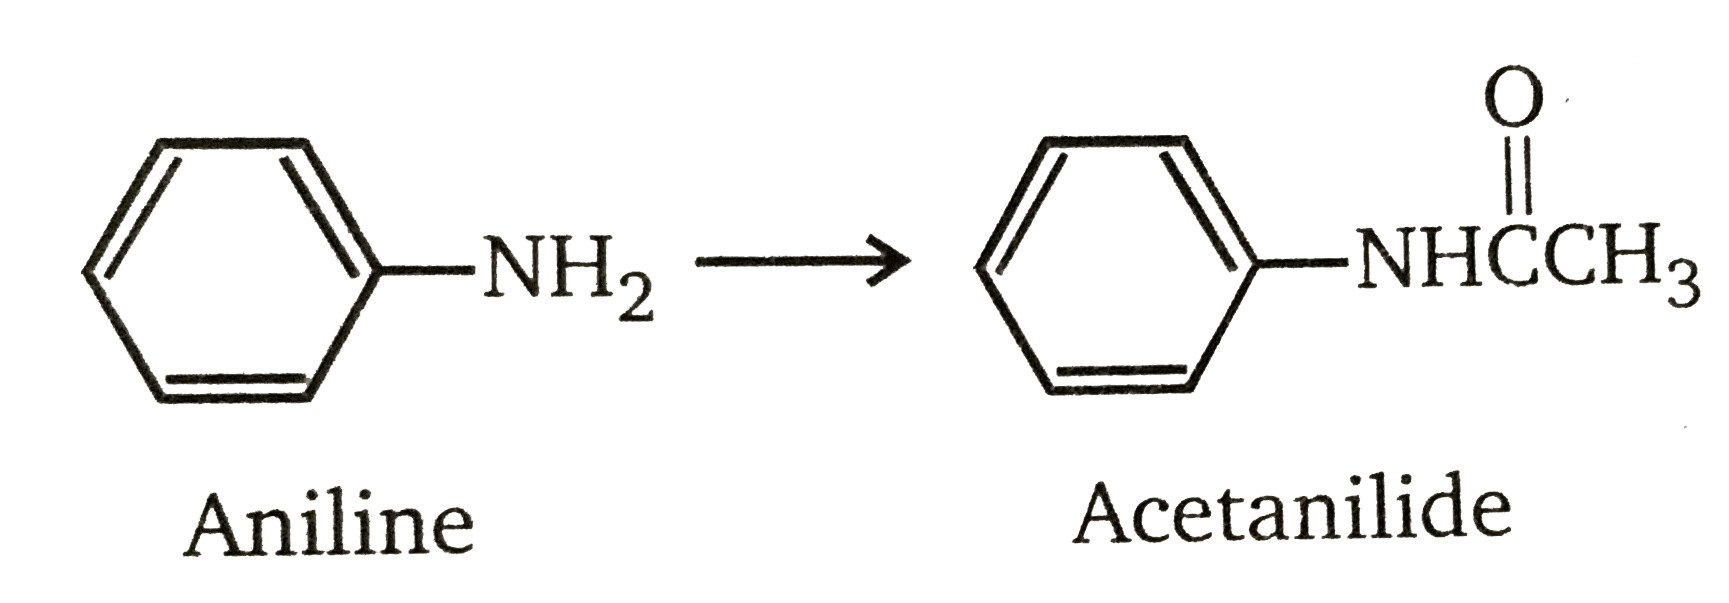 All but one of the following compounds react with aniline to give acetanilide. Which one does not?